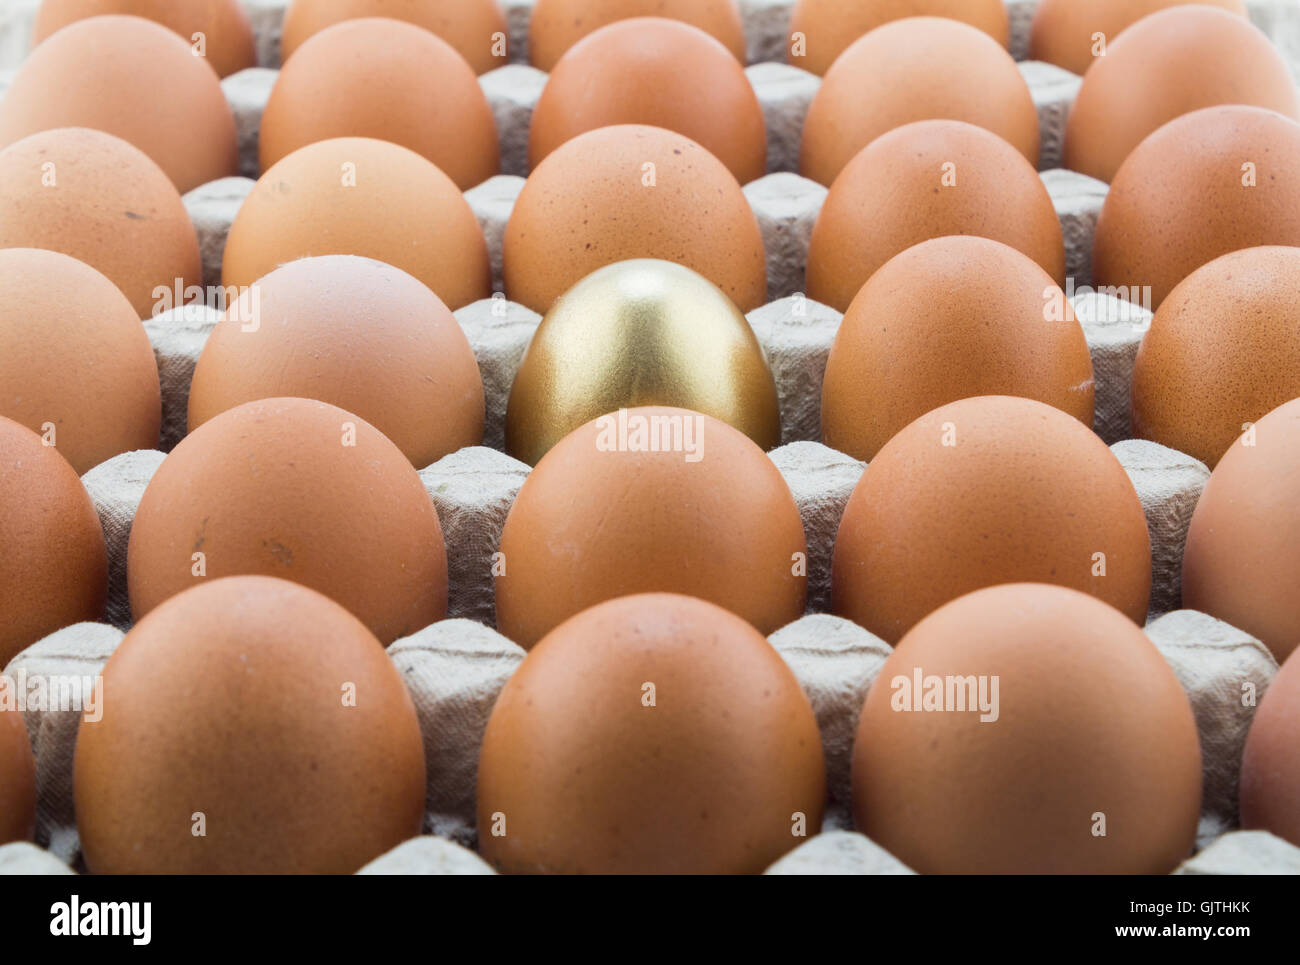 Abstract background with single golden egg and many normal hen eggs in carton Stock Photo